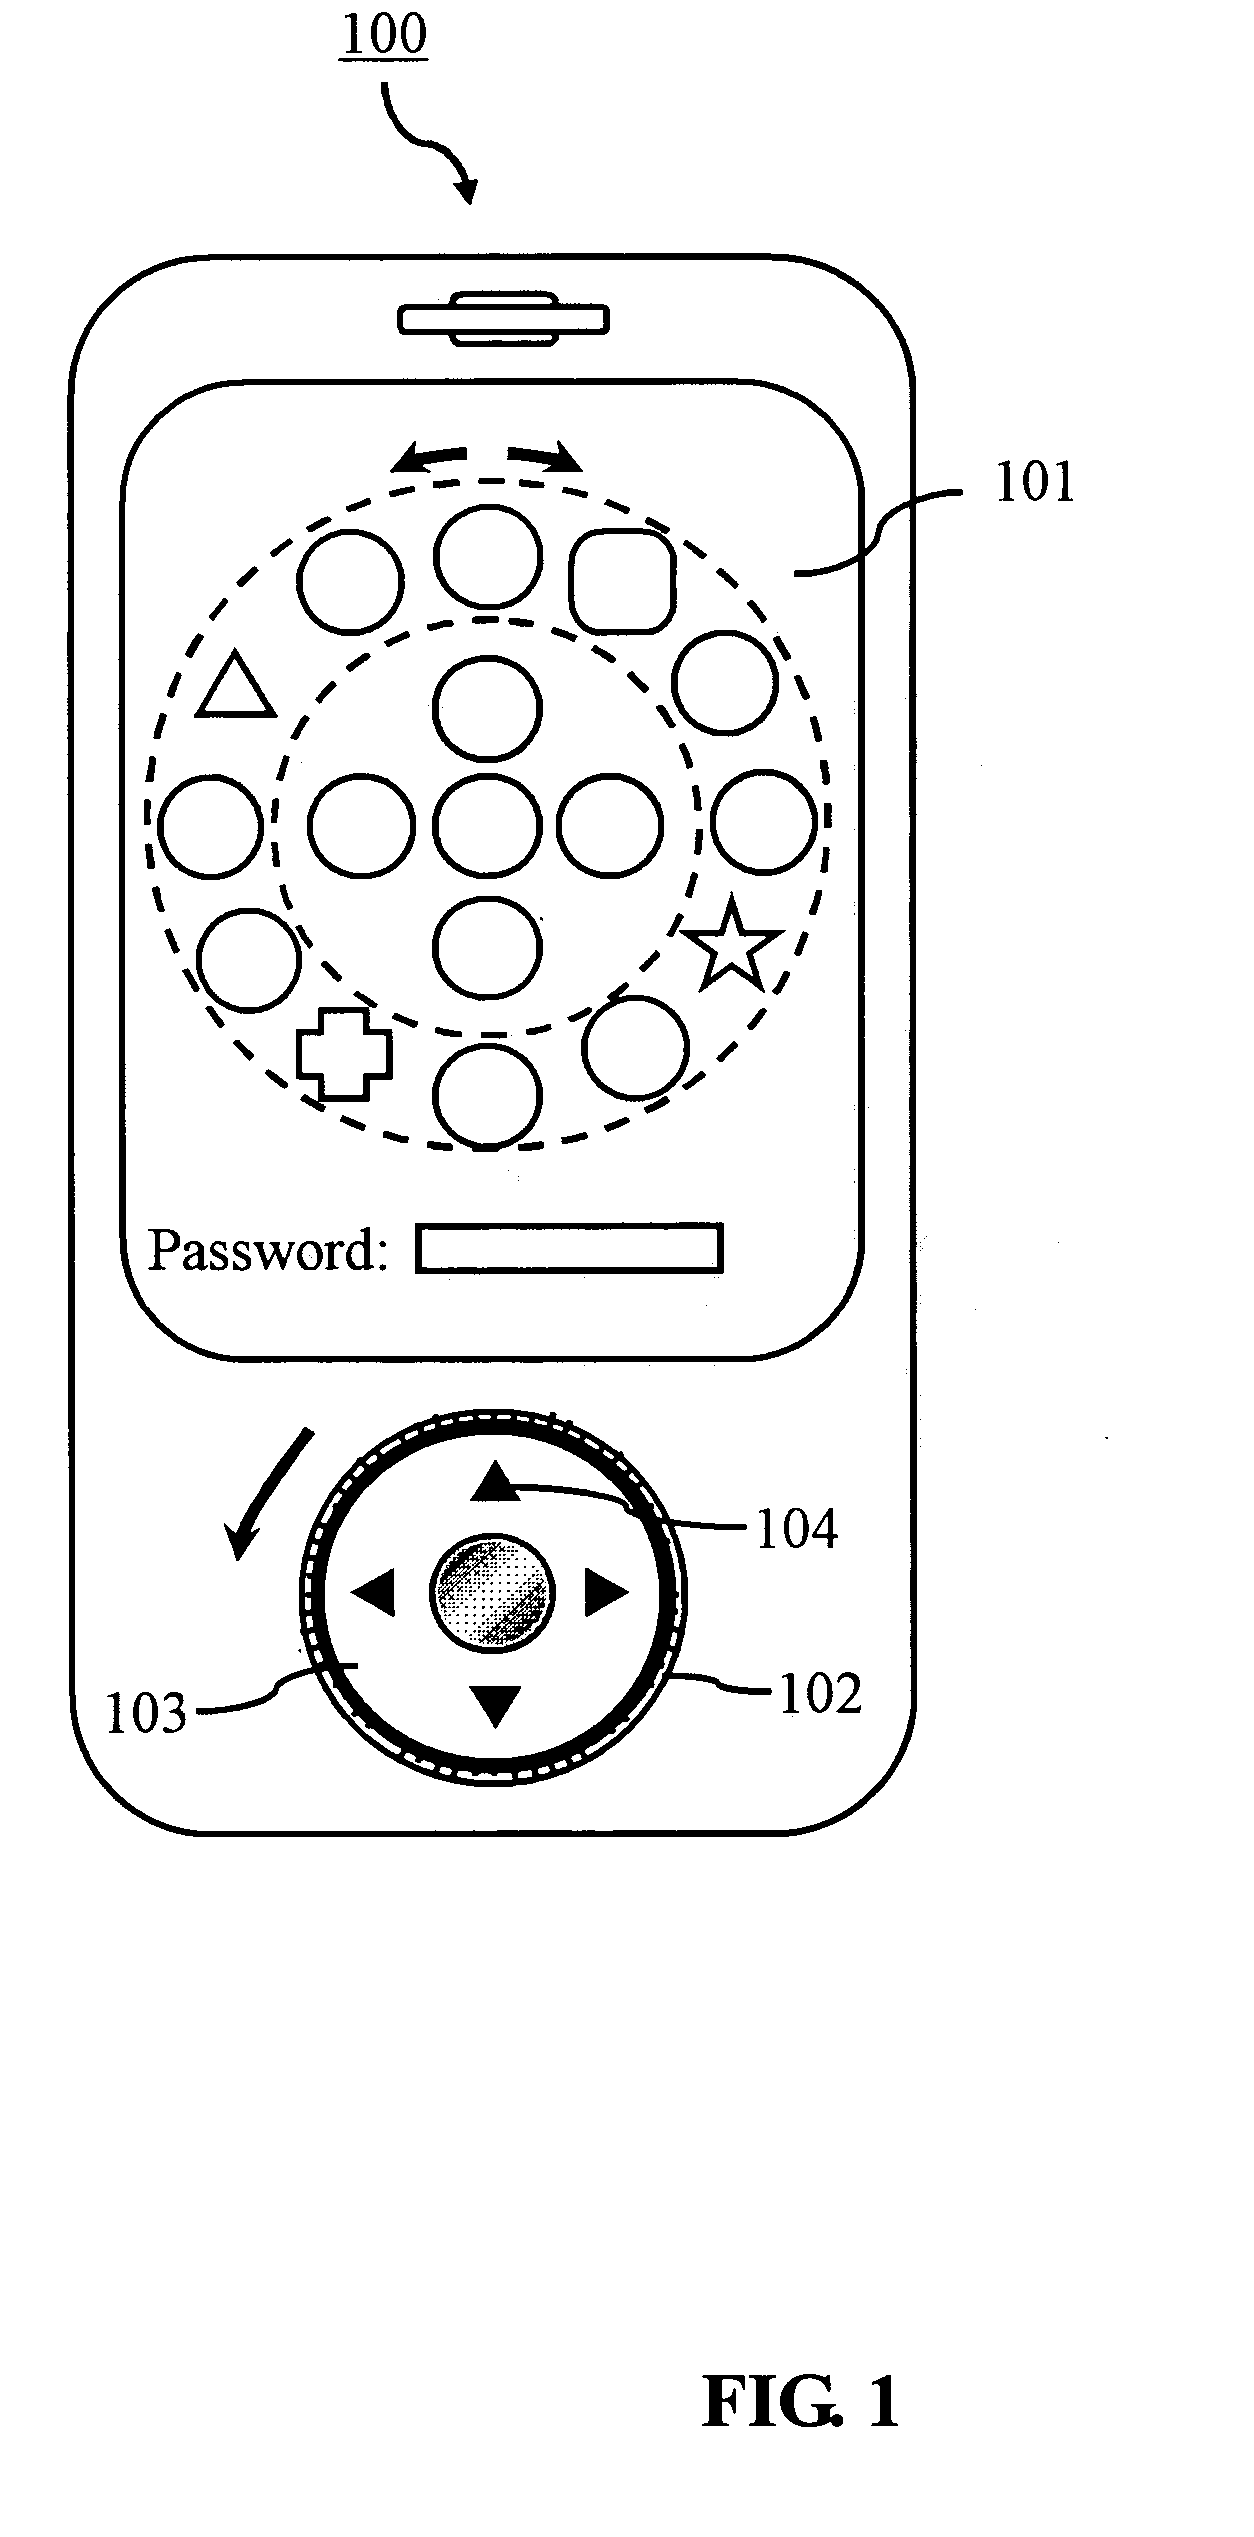 Apparatus and method for inputting graphical password using wheel interface in embedded system